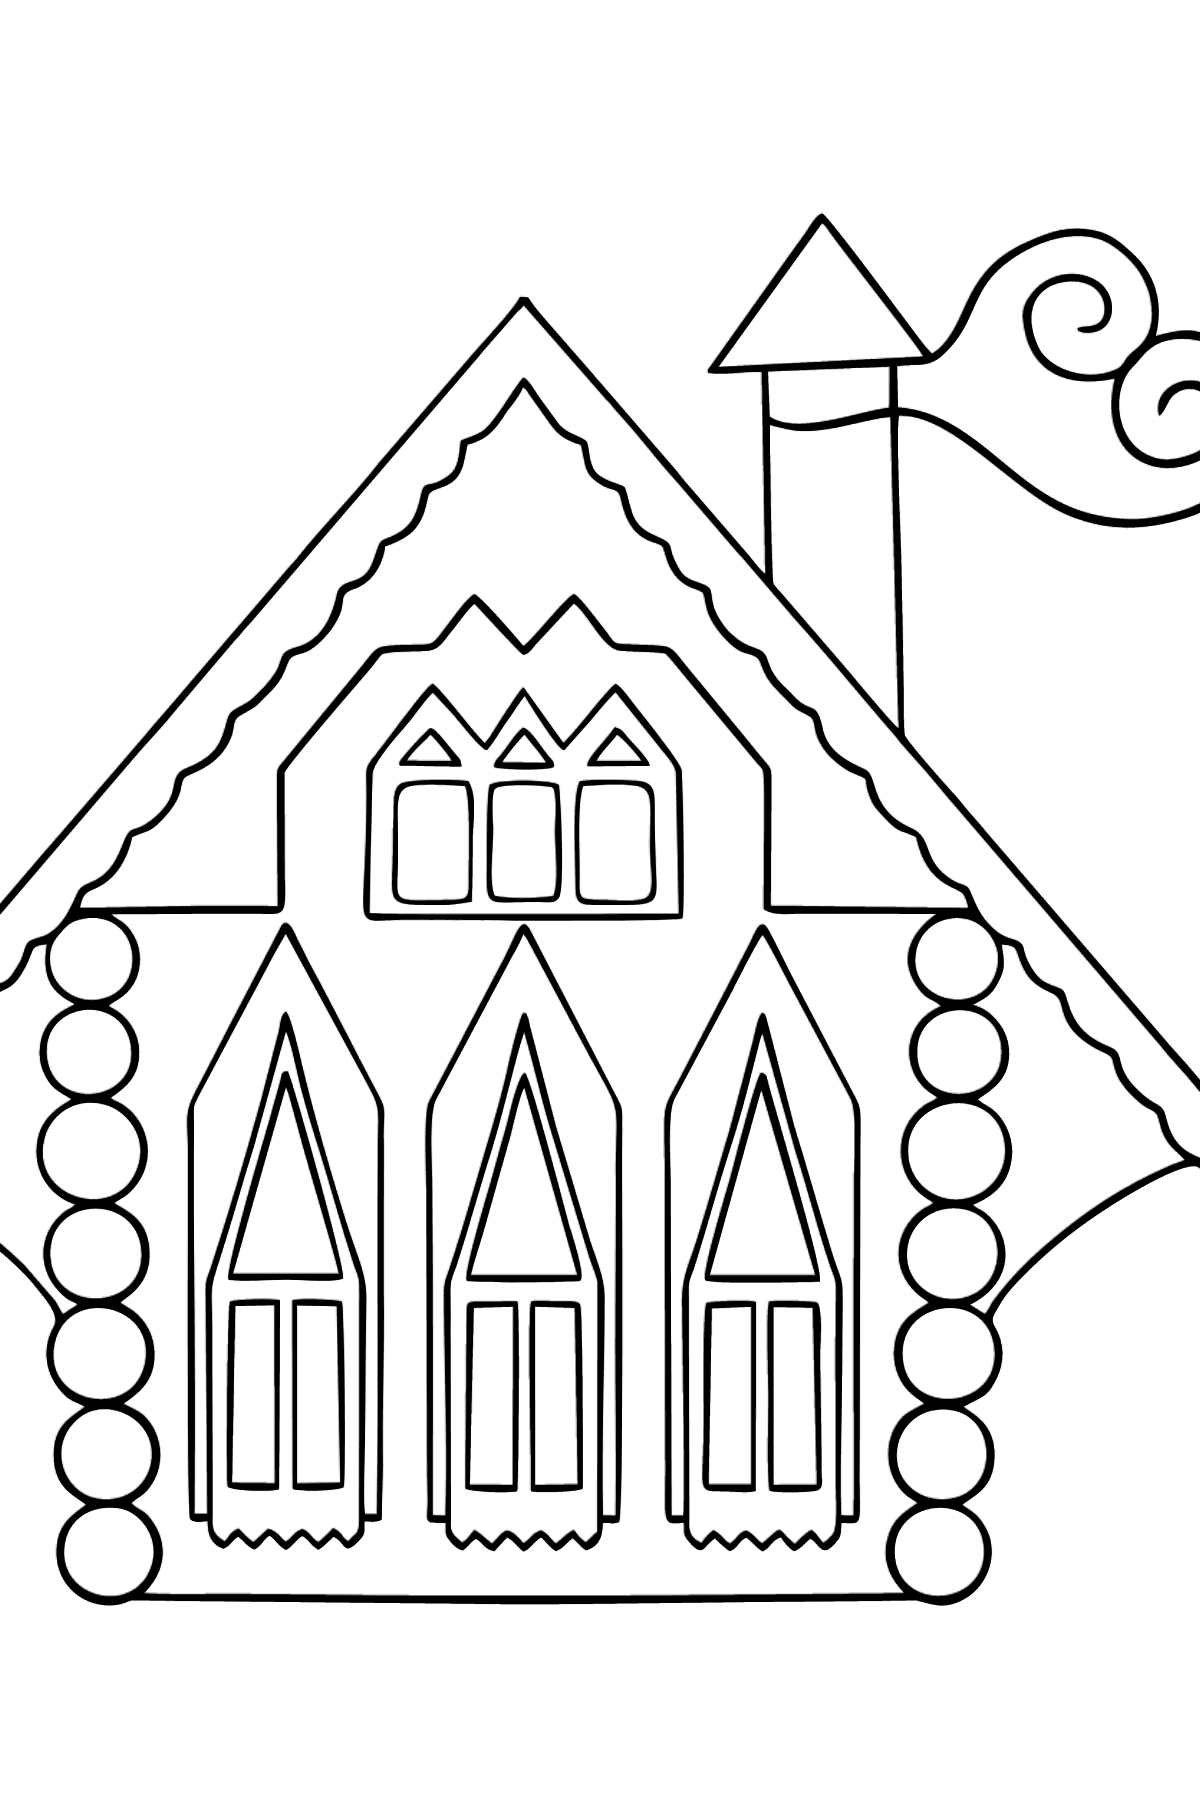 Rainbow House Coloring Page Easy ♥ Online and Print for Free